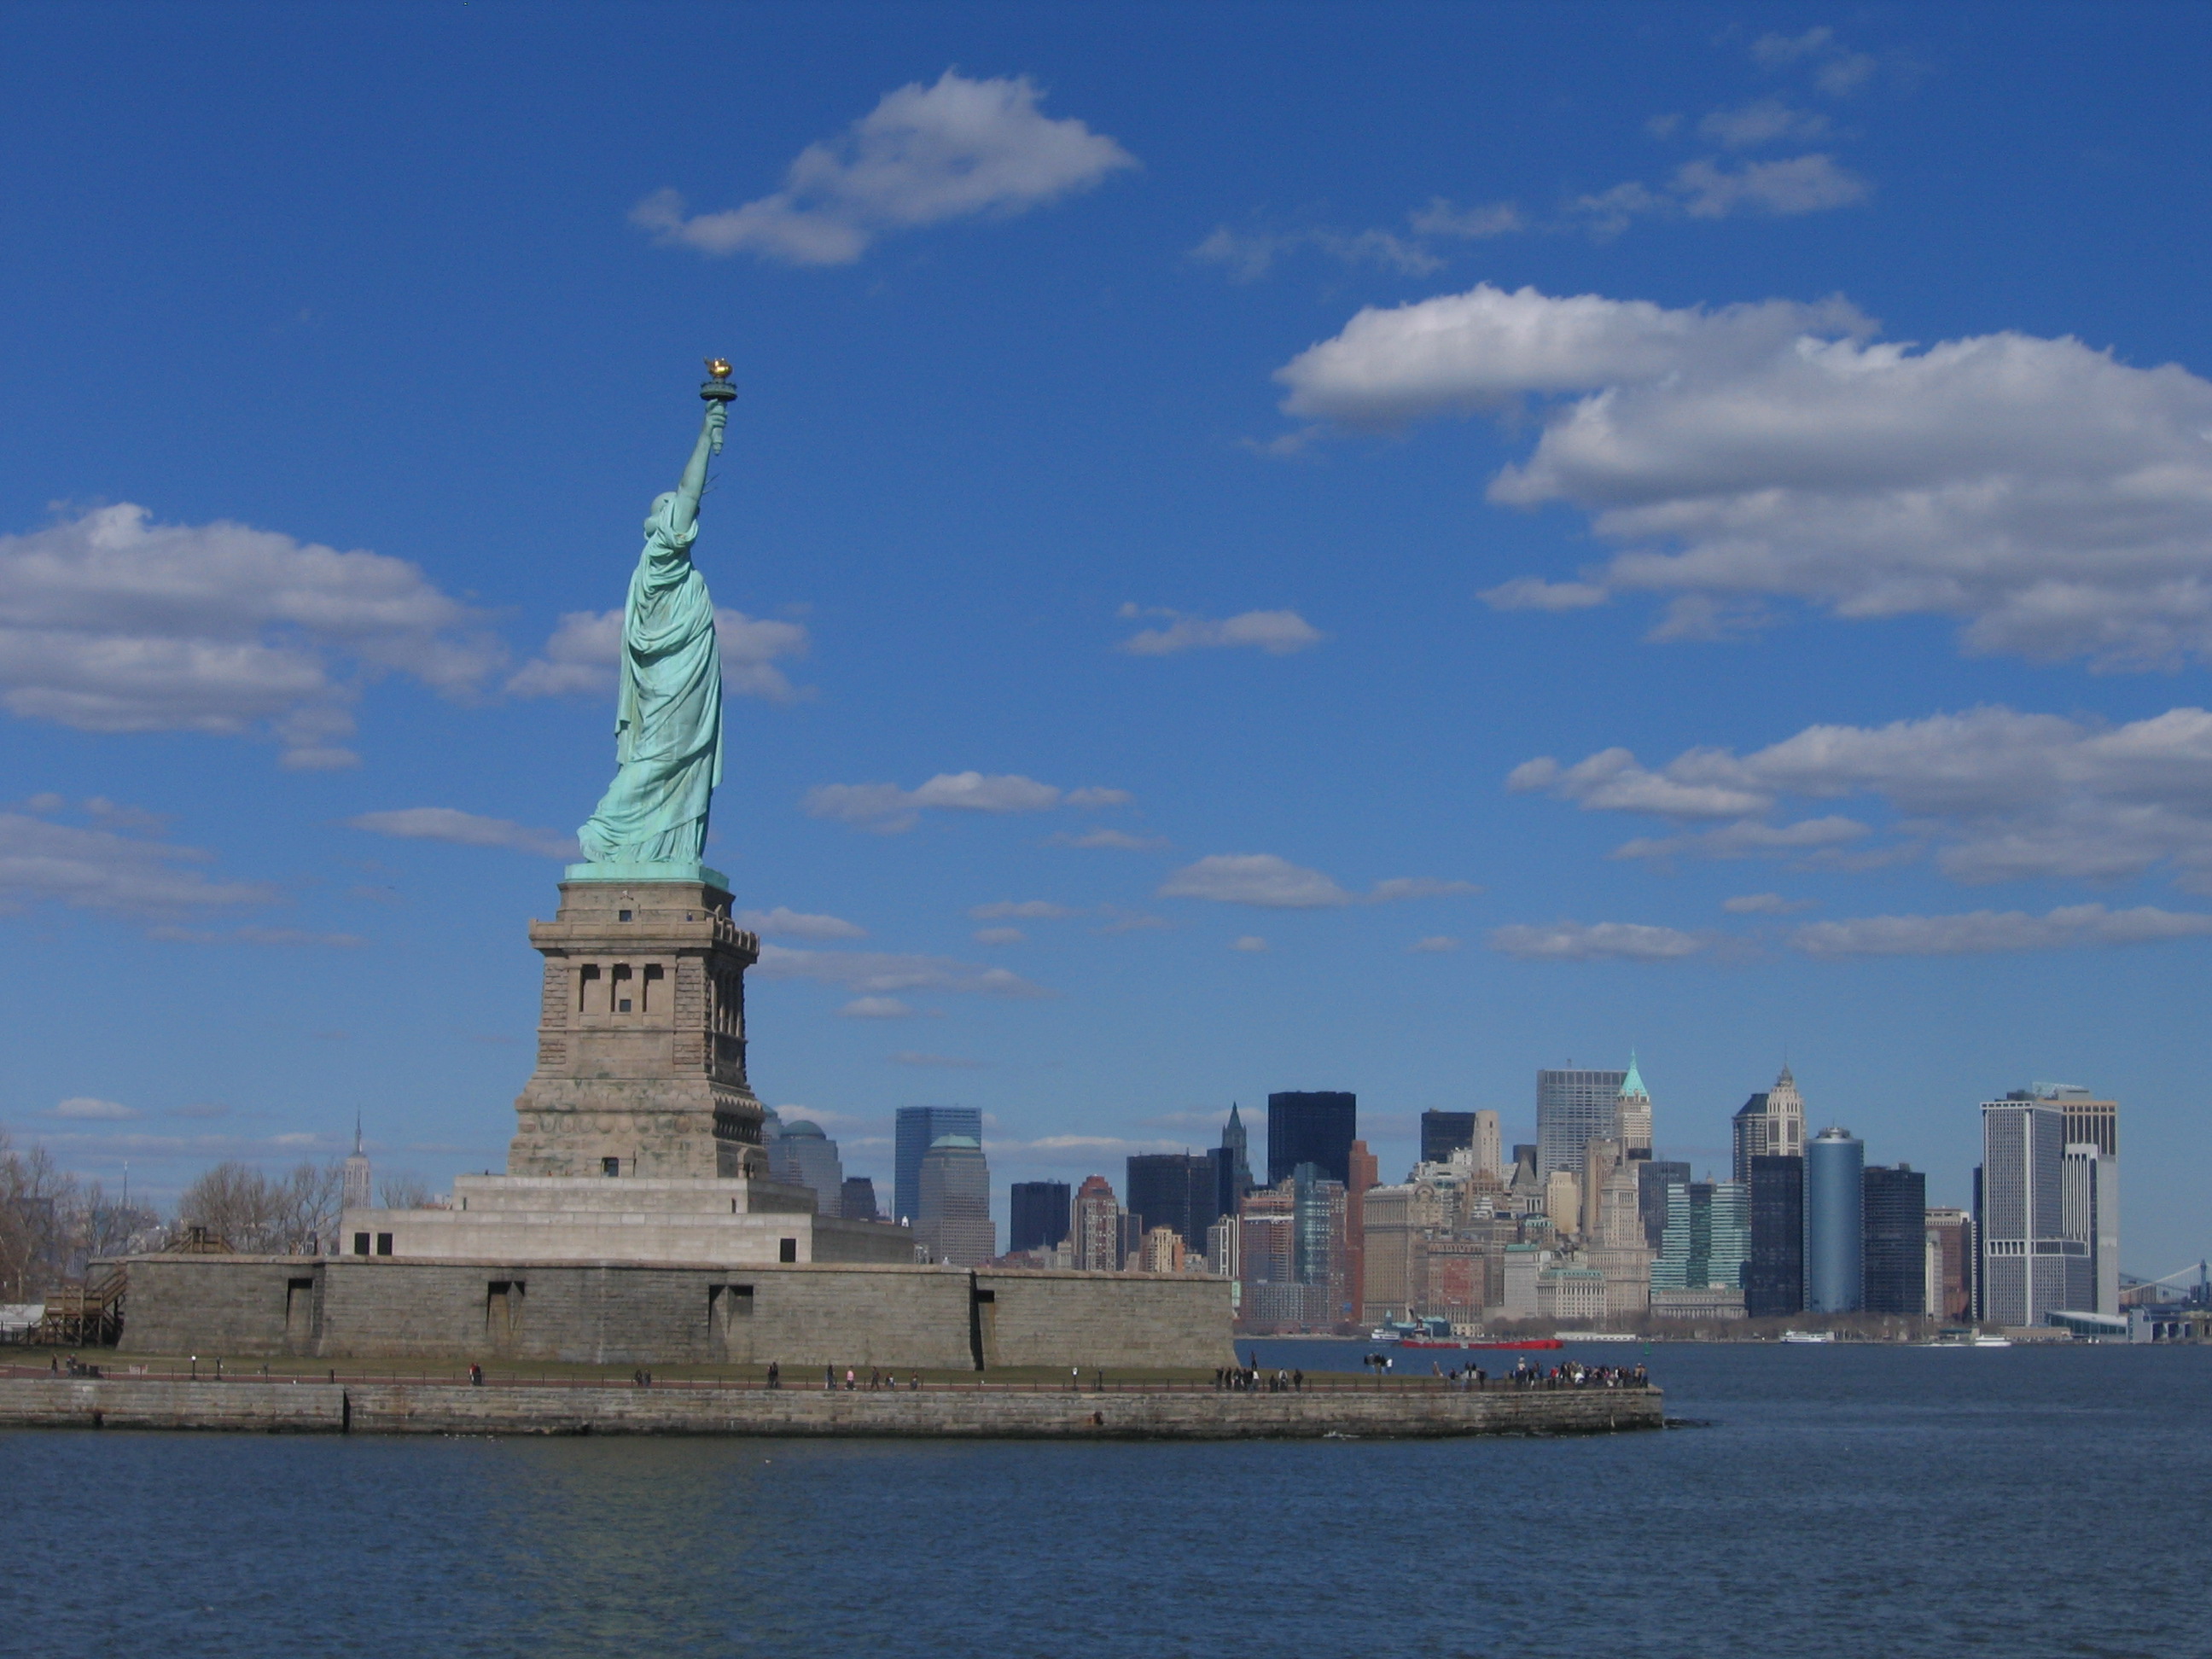 The Statue of Liberty in front of the New York City skyline.